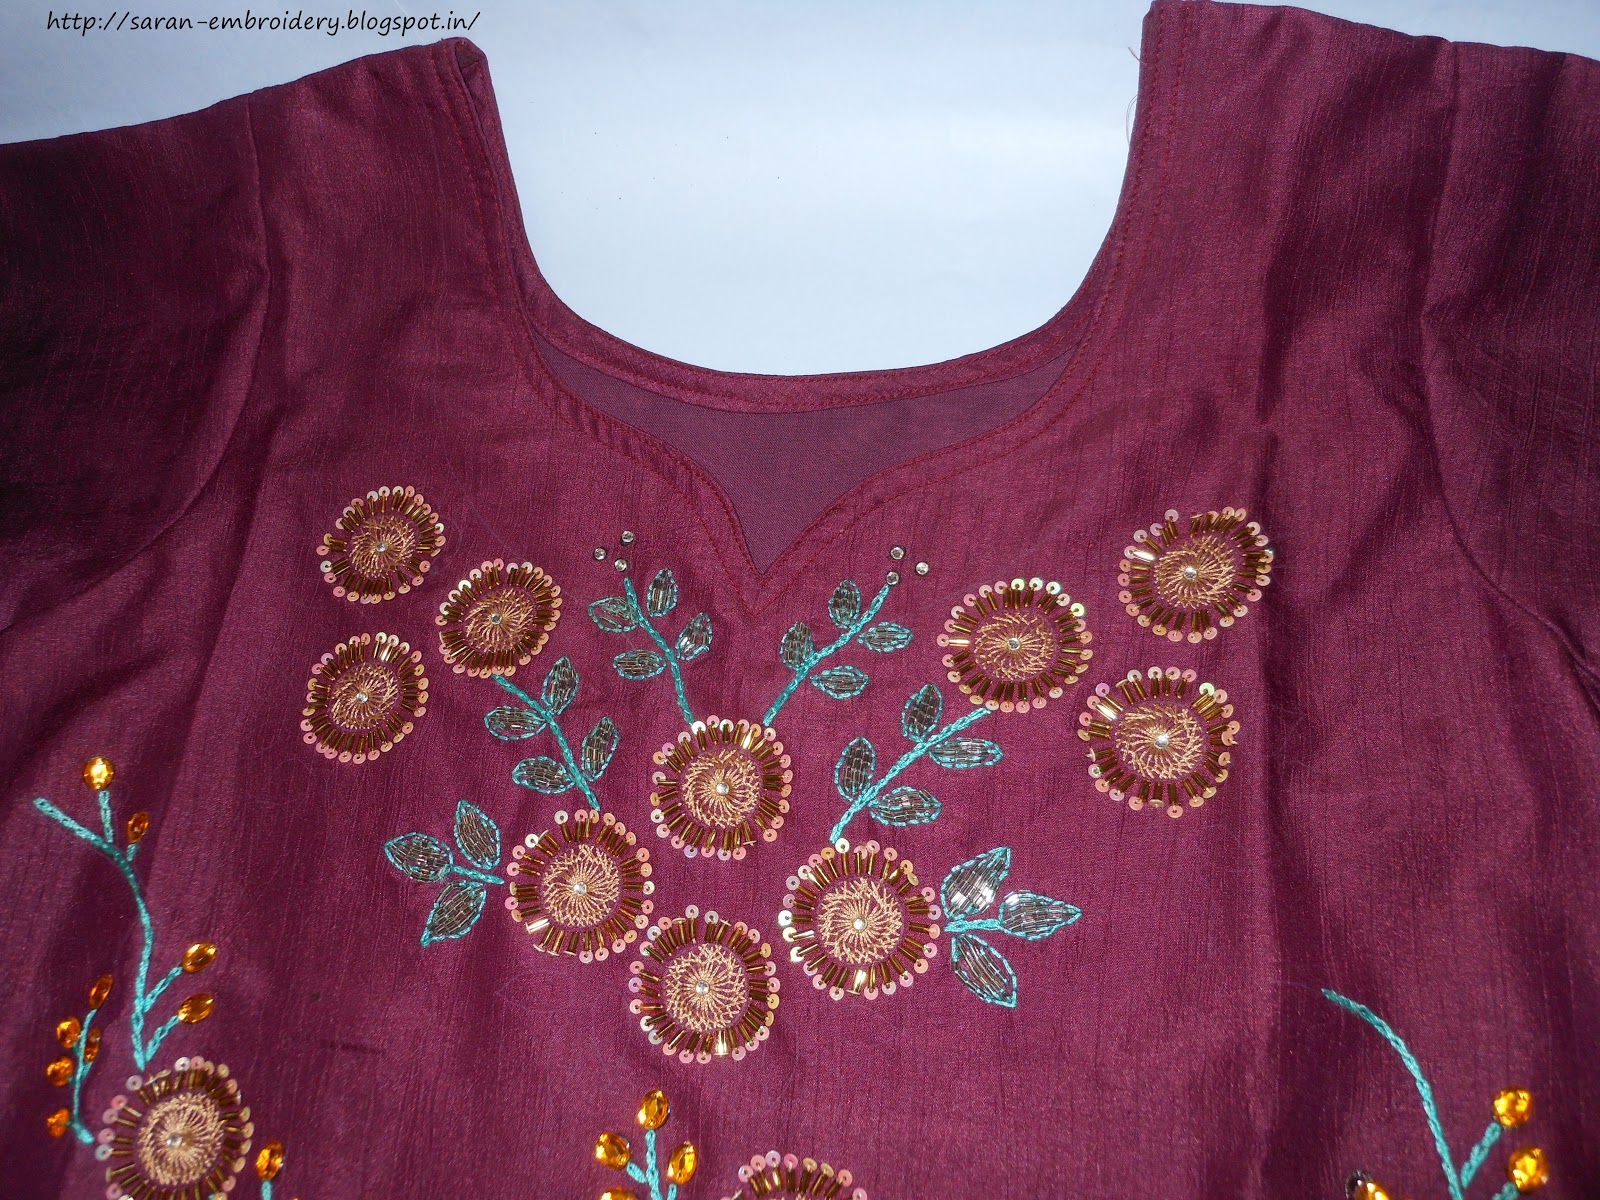 SARAN-EMBROIDERY: CHAMANTHI WORK IN A CHUDIDHAR DONE BY ME IN 2007